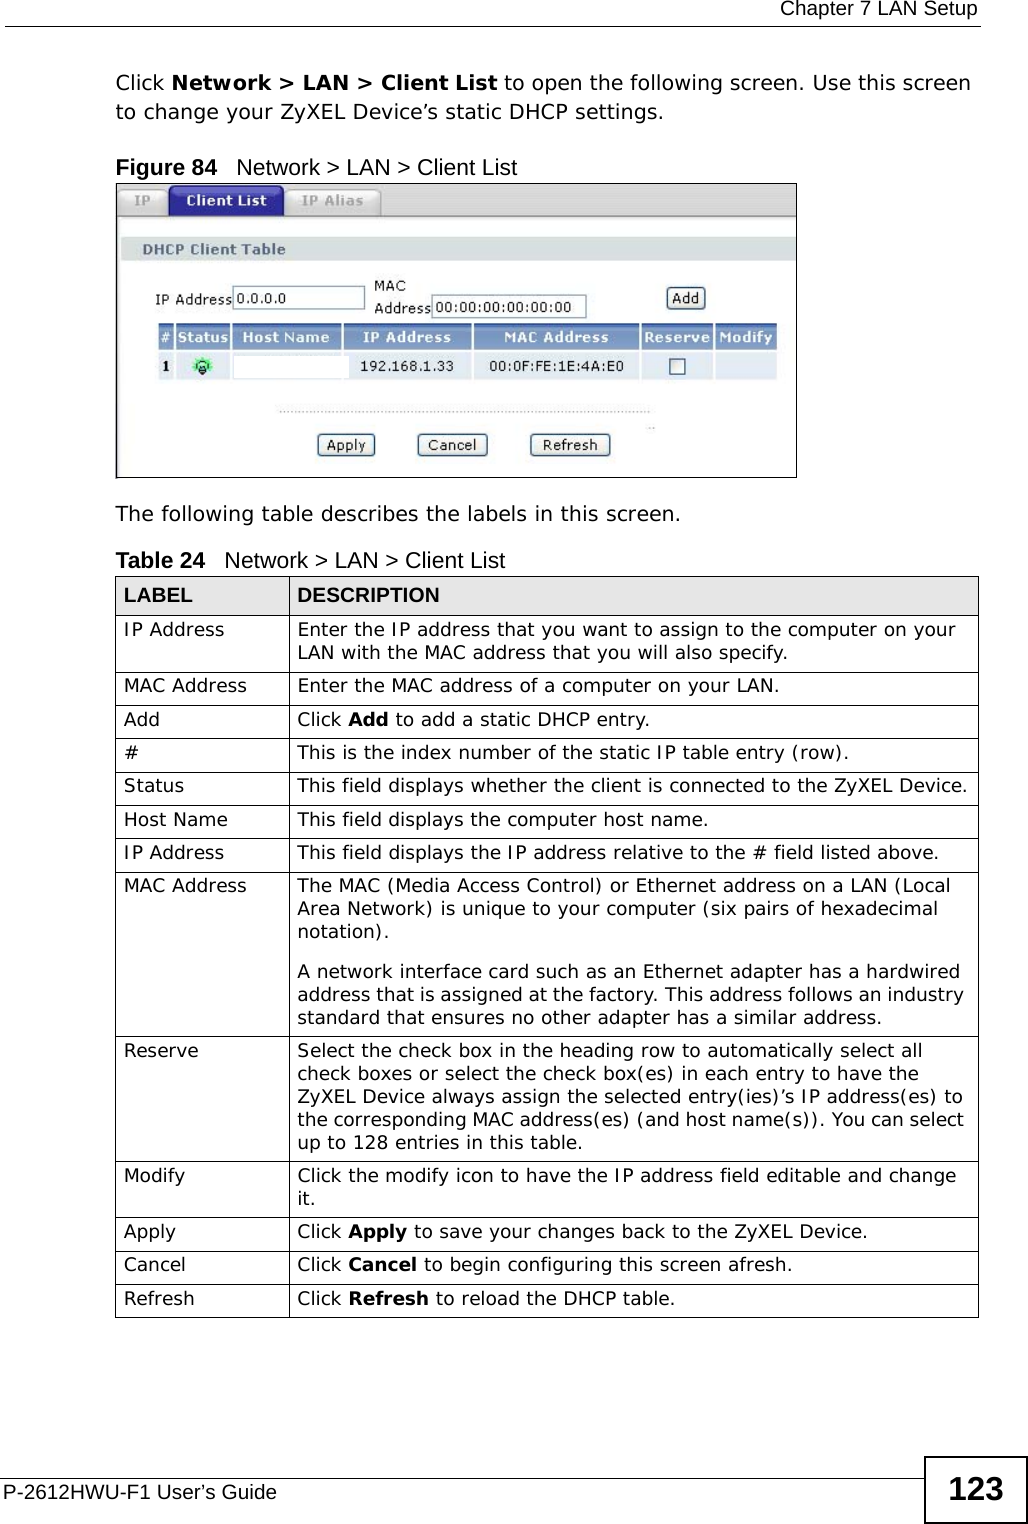  Chapter 7 LAN SetupP-2612HWU-F1 User’s Guide 123Click Network &gt; LAN &gt; Client List to open the following screen. Use this screen to change your ZyXEL Device’s static DHCP settings.Figure 84   Network &gt; LAN &gt; Client ListThe following table describes the labels in this screen.Table 24   Network &gt; LAN &gt; Client List  LABEL DESCRIPTIONIP Address Enter the IP address that you want to assign to the computer on your LAN with the MAC address that you will also specify.MAC Address Enter the MAC address of a computer on your LAN.Add Click Add to add a static DHCP entry. # This is the index number of the static IP table entry (row).Status This field displays whether the client is connected to the ZyXEL Device.Host Name  This field displays the computer host name.IP Address This field displays the IP address relative to the # field listed above.MAC Address The MAC (Media Access Control) or Ethernet address on a LAN (Local Area Network) is unique to your computer (six pairs of hexadecimal notation).A network interface card such as an Ethernet adapter has a hardwired address that is assigned at the factory. This address follows an industry standard that ensures no other adapter has a similar address.Reserve Select the check box in the heading row to automatically select all check boxes or select the check box(es) in each entry to have the ZyXEL Device always assign the selected entry(ies)’s IP address(es) to the corresponding MAC address(es) (and host name(s)). You can select up to 128 entries in this table.  Modify Click the modify icon to have the IP address field editable and change it.Apply Click Apply to save your changes back to the ZyXEL Device.Cancel Click Cancel to begin configuring this screen afresh.Refresh Click Refresh to reload the DHCP table.